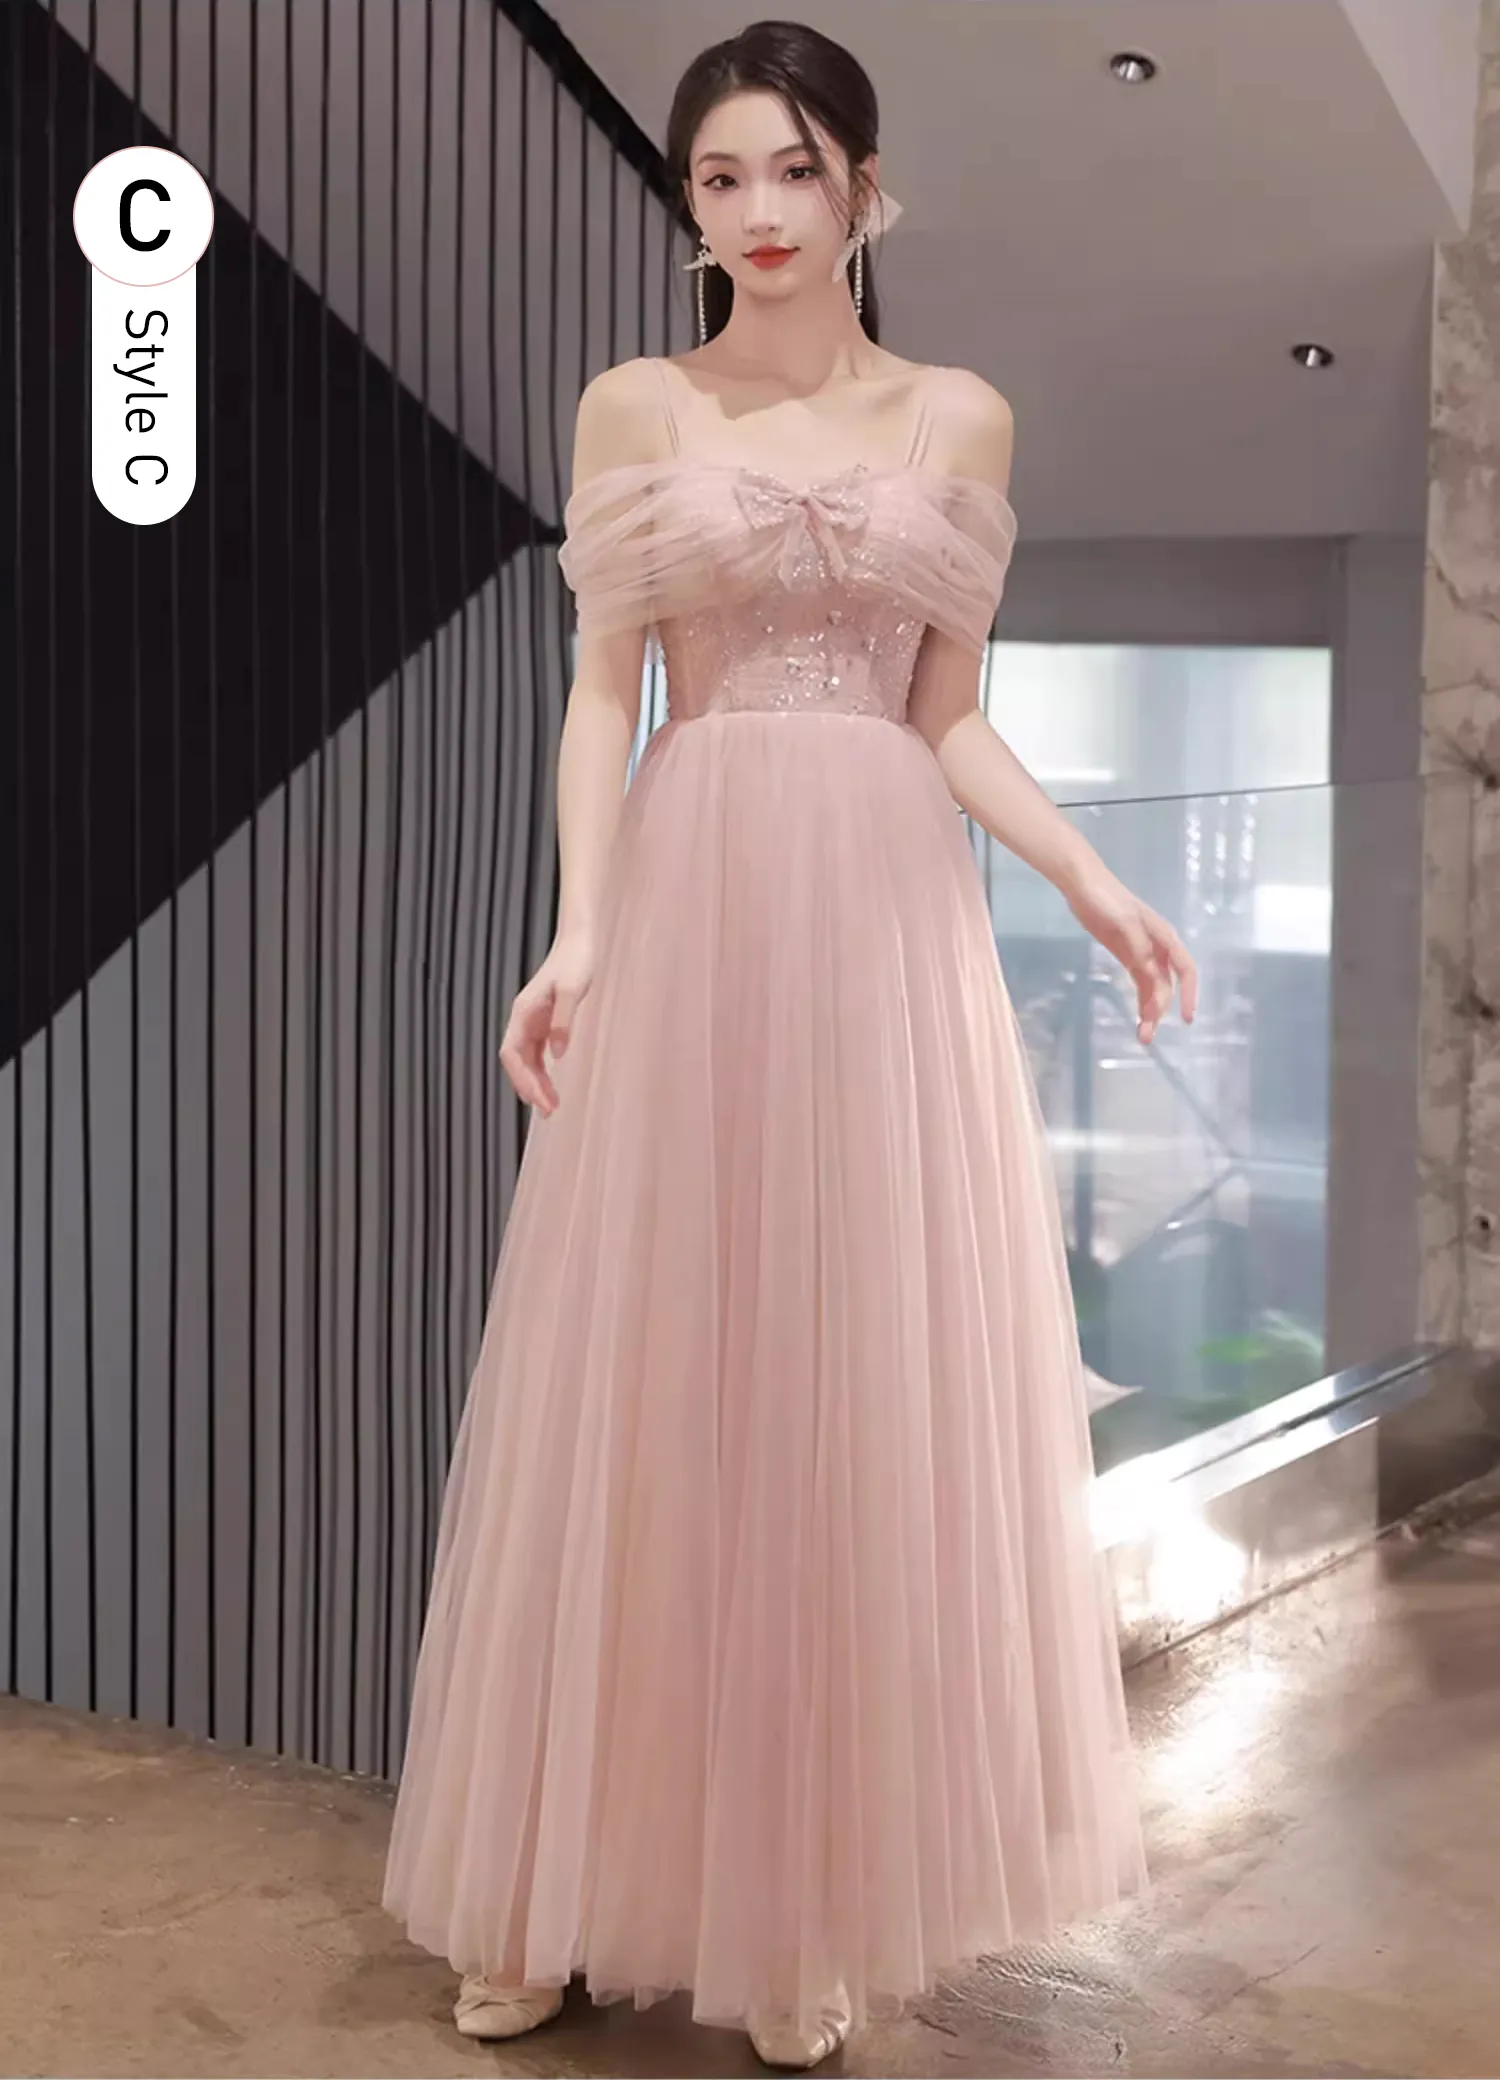 Trendy-Pink-Mesh-Chiffon-Bridesmaid-Maxi-Dress-Evening-Party-Gown19